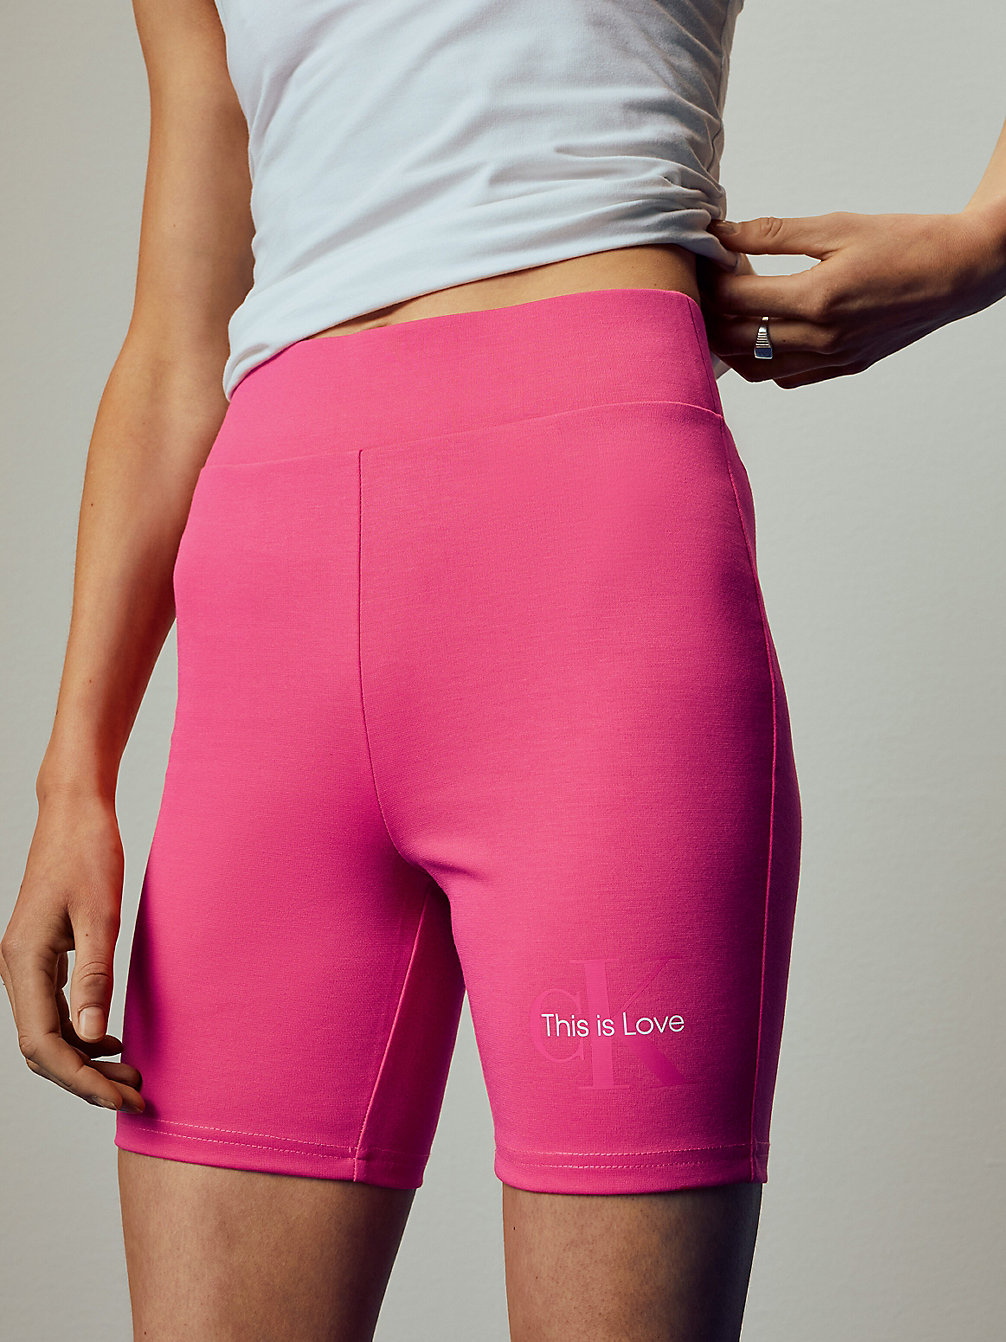 PINK FLAMBE Milano Jersey Cycling Shorts - Pride undefined women Calvin Klein